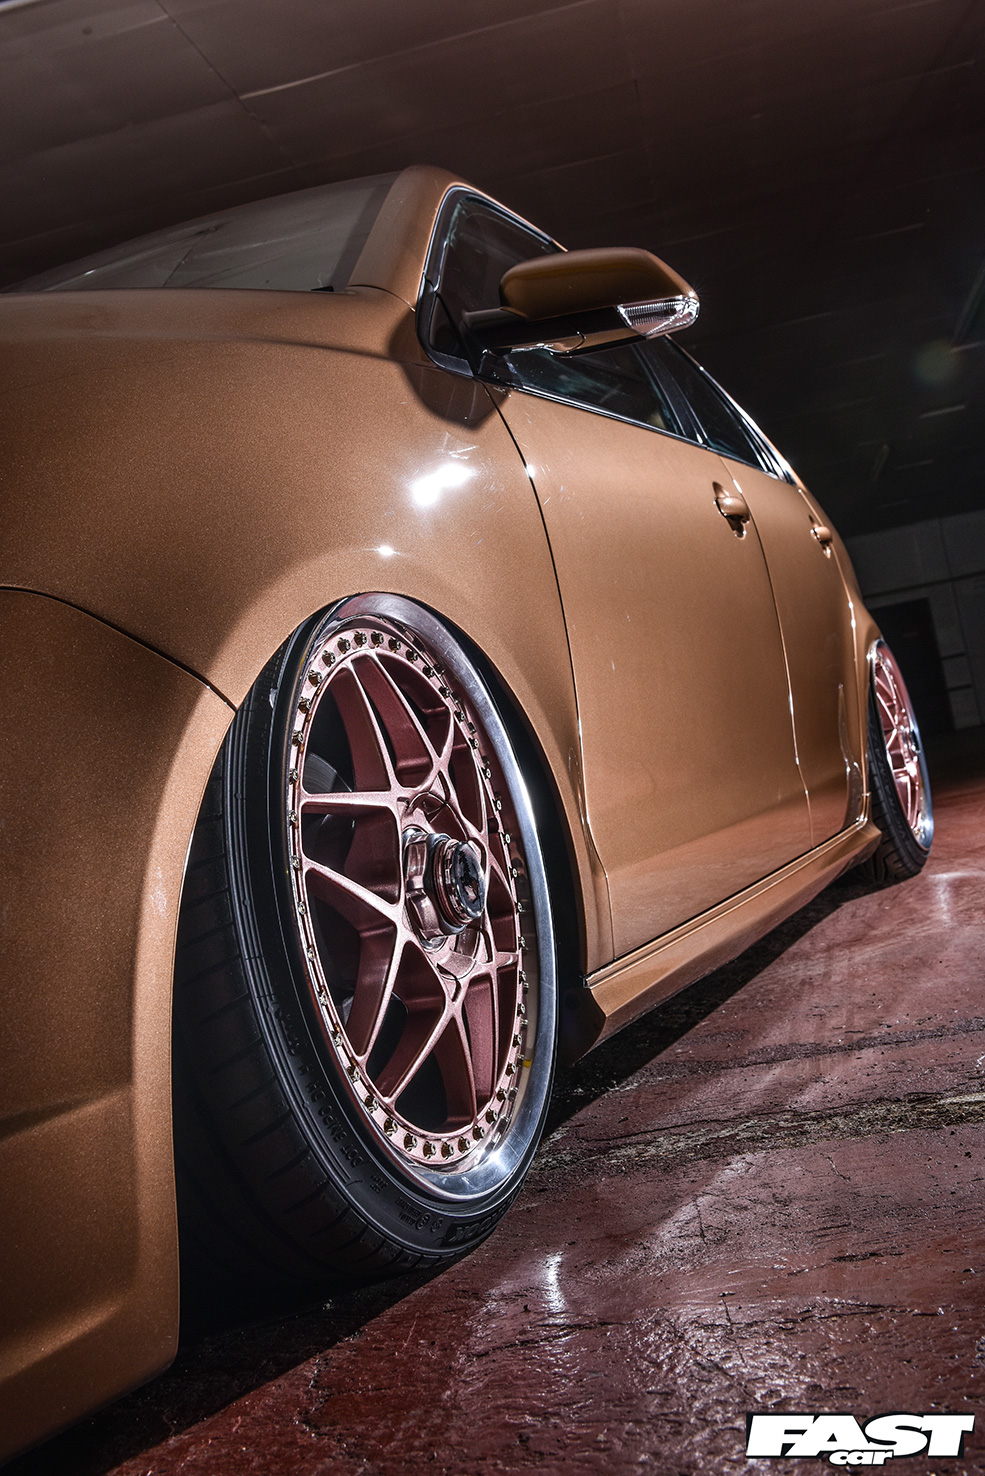 VW Polo 9n3 Bagged on Gold Rims Project Car by Tom 